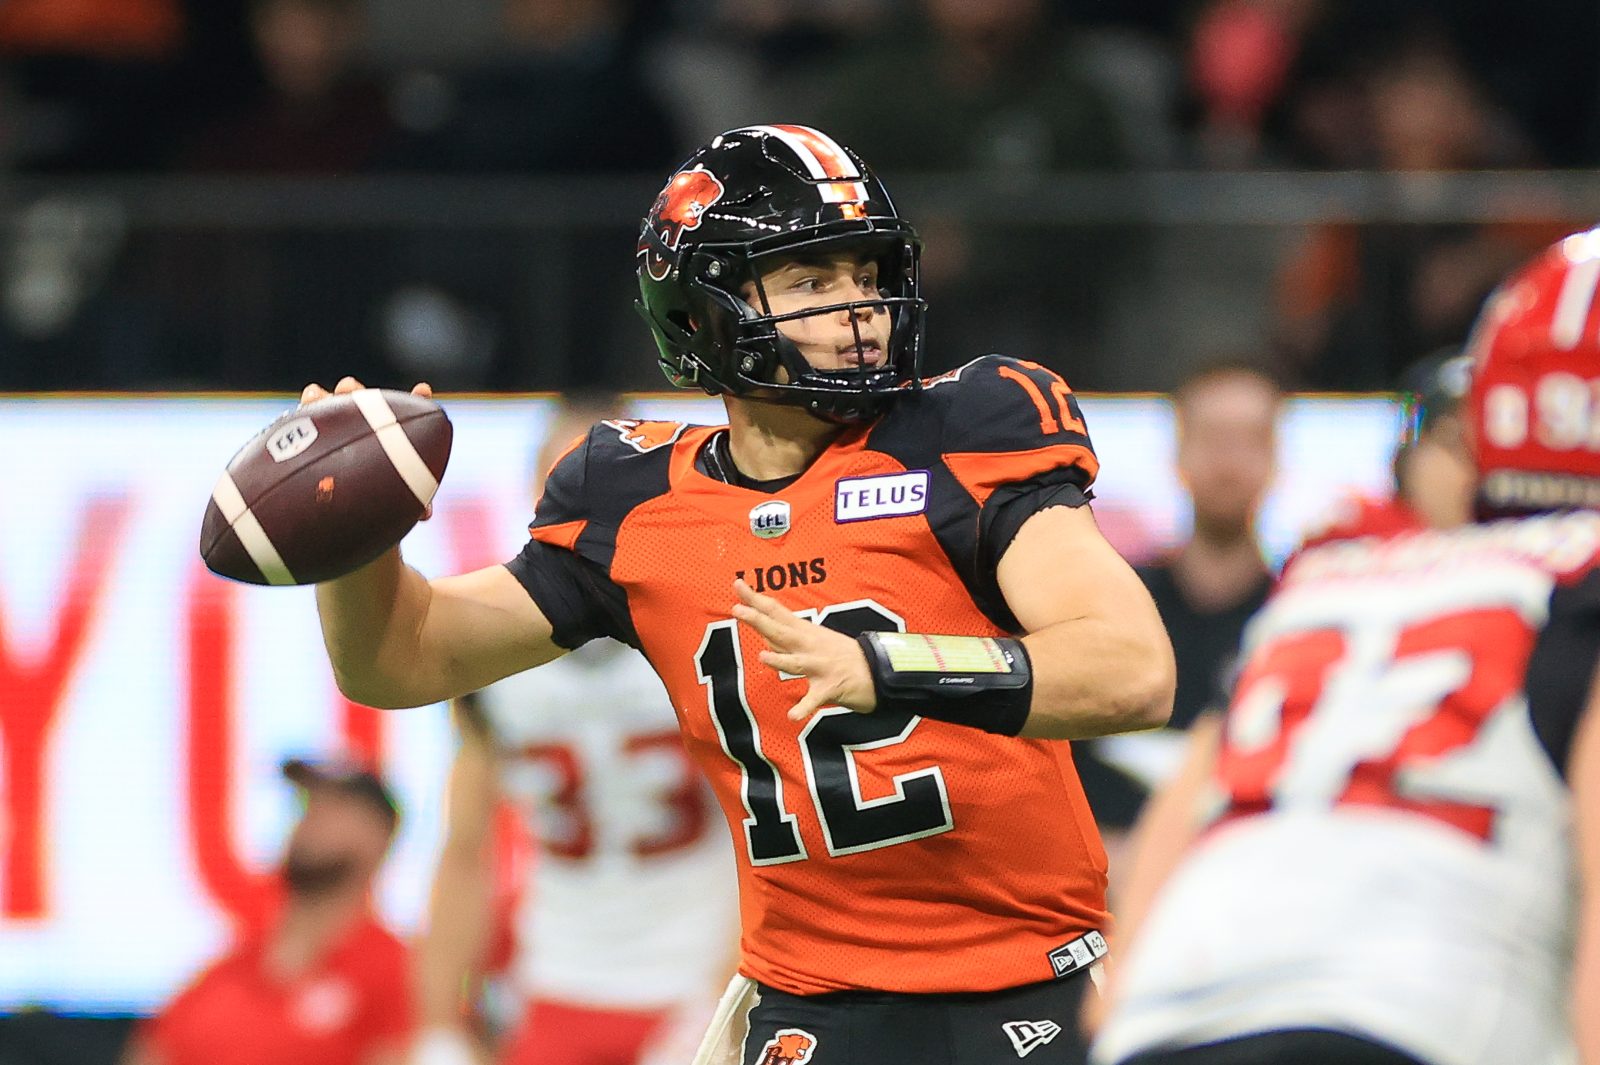 Nathan Rourke | Holy Trinity grad Nathan Rourke looks to take the next step in his career progression after being named the BC Lions